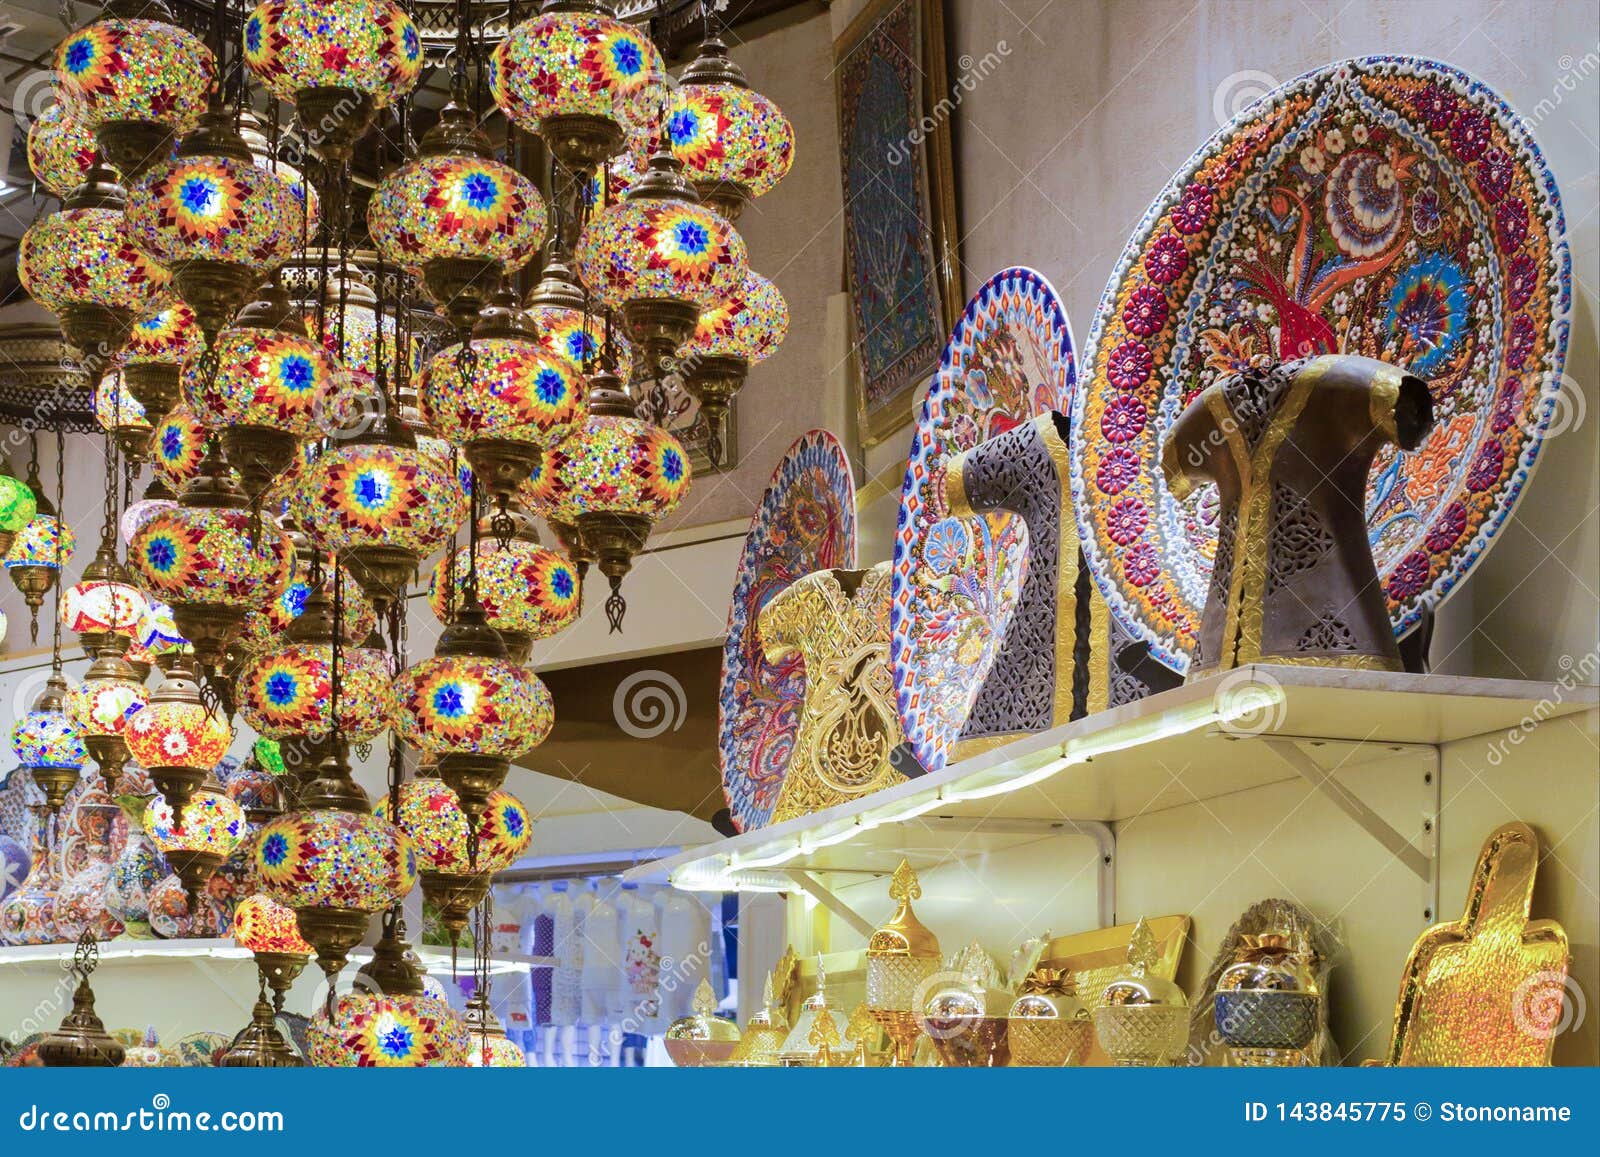 Glass Colorful Traditional Decorative Turkish Lamps Hang On The